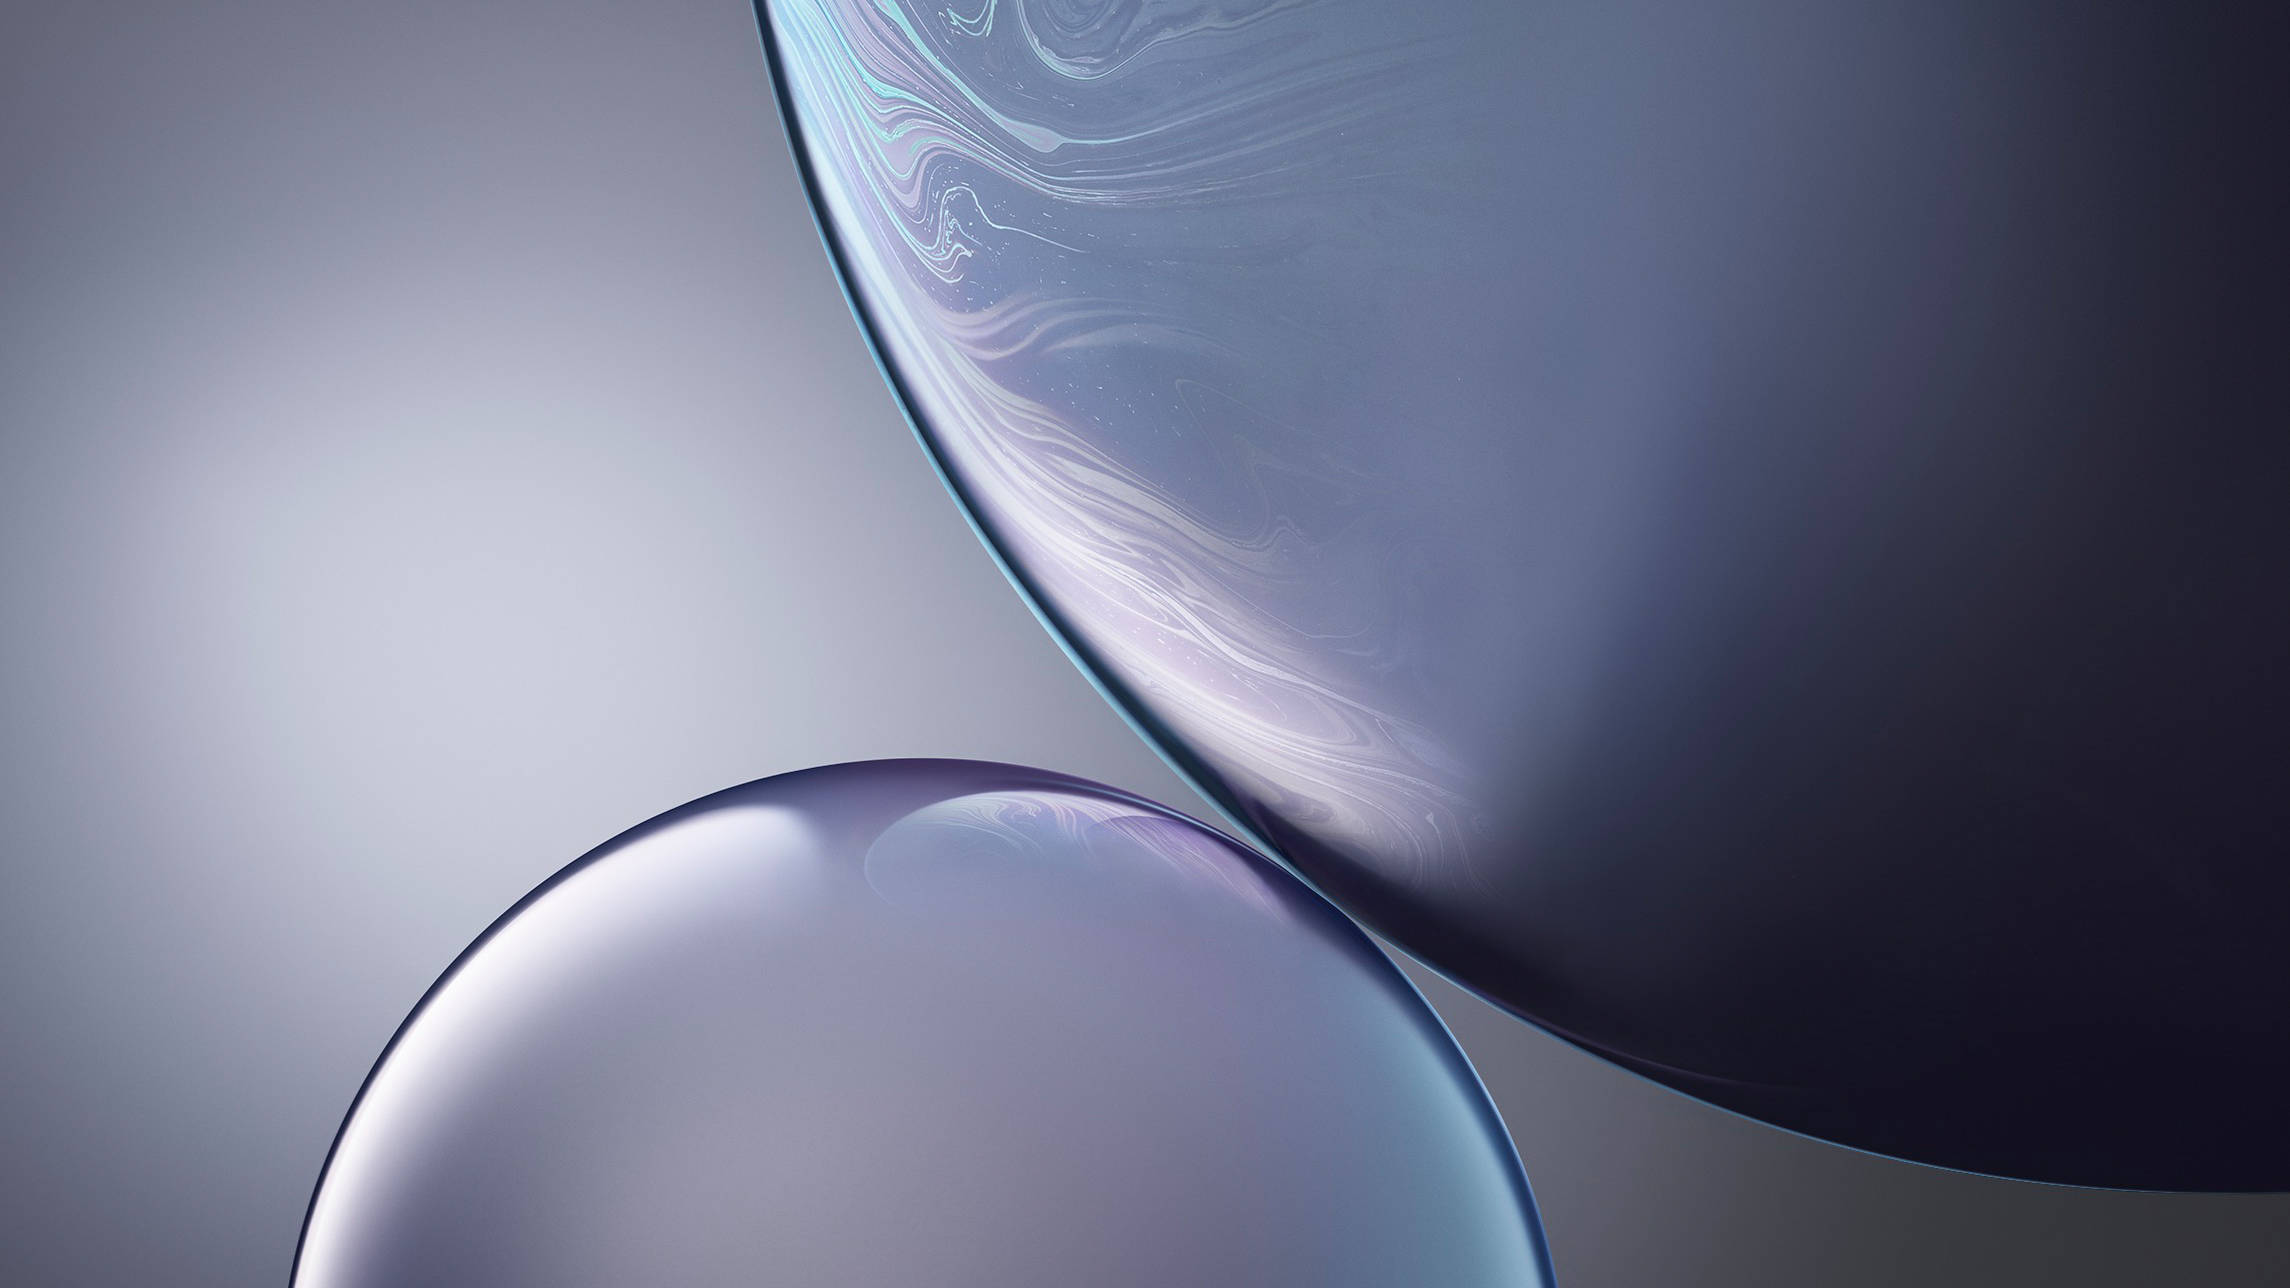 Cool Iphone Spheres Background